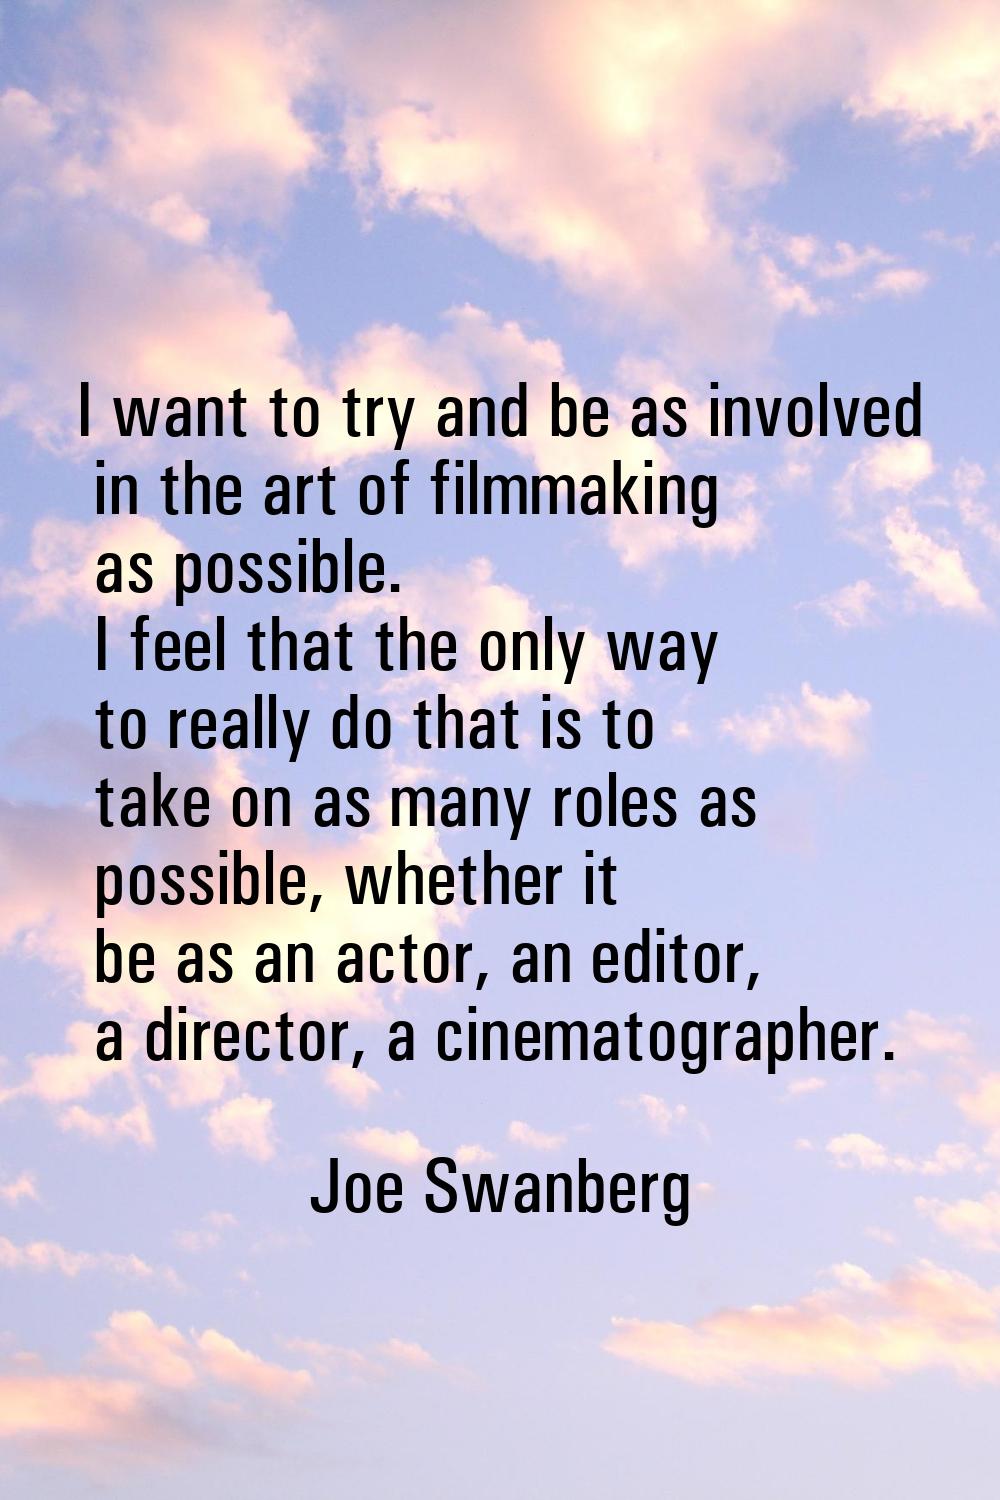 I want to try and be as involved in the art of filmmaking as possible. I feel that the only way to 